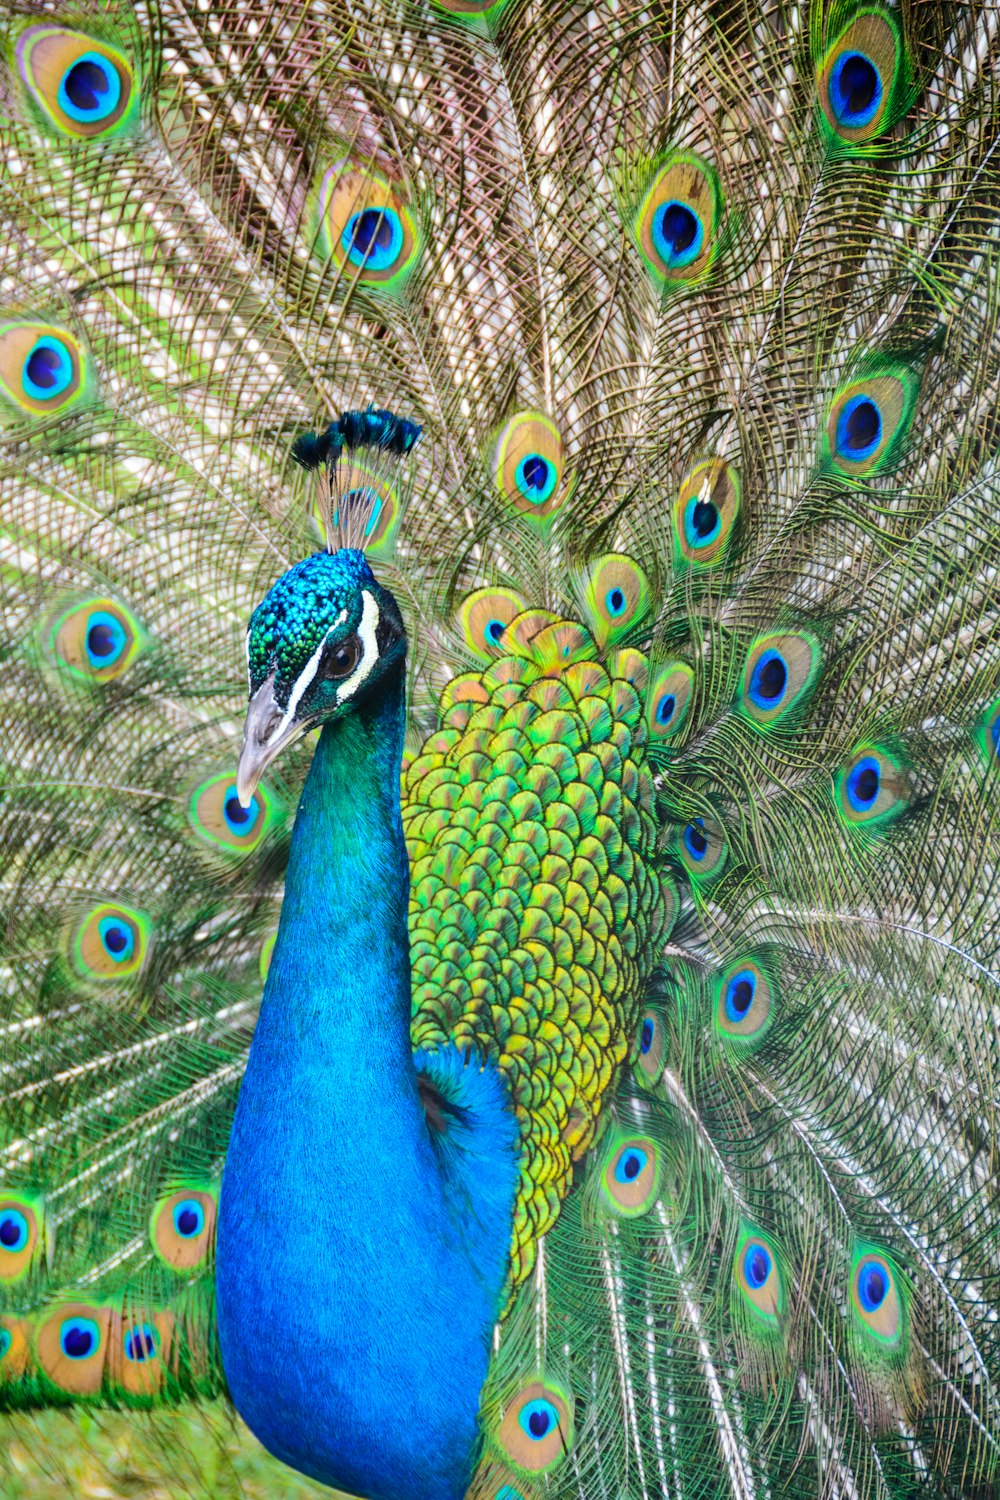 100+ Peacock Pictures [HD] | Download Free Images on Unsplash